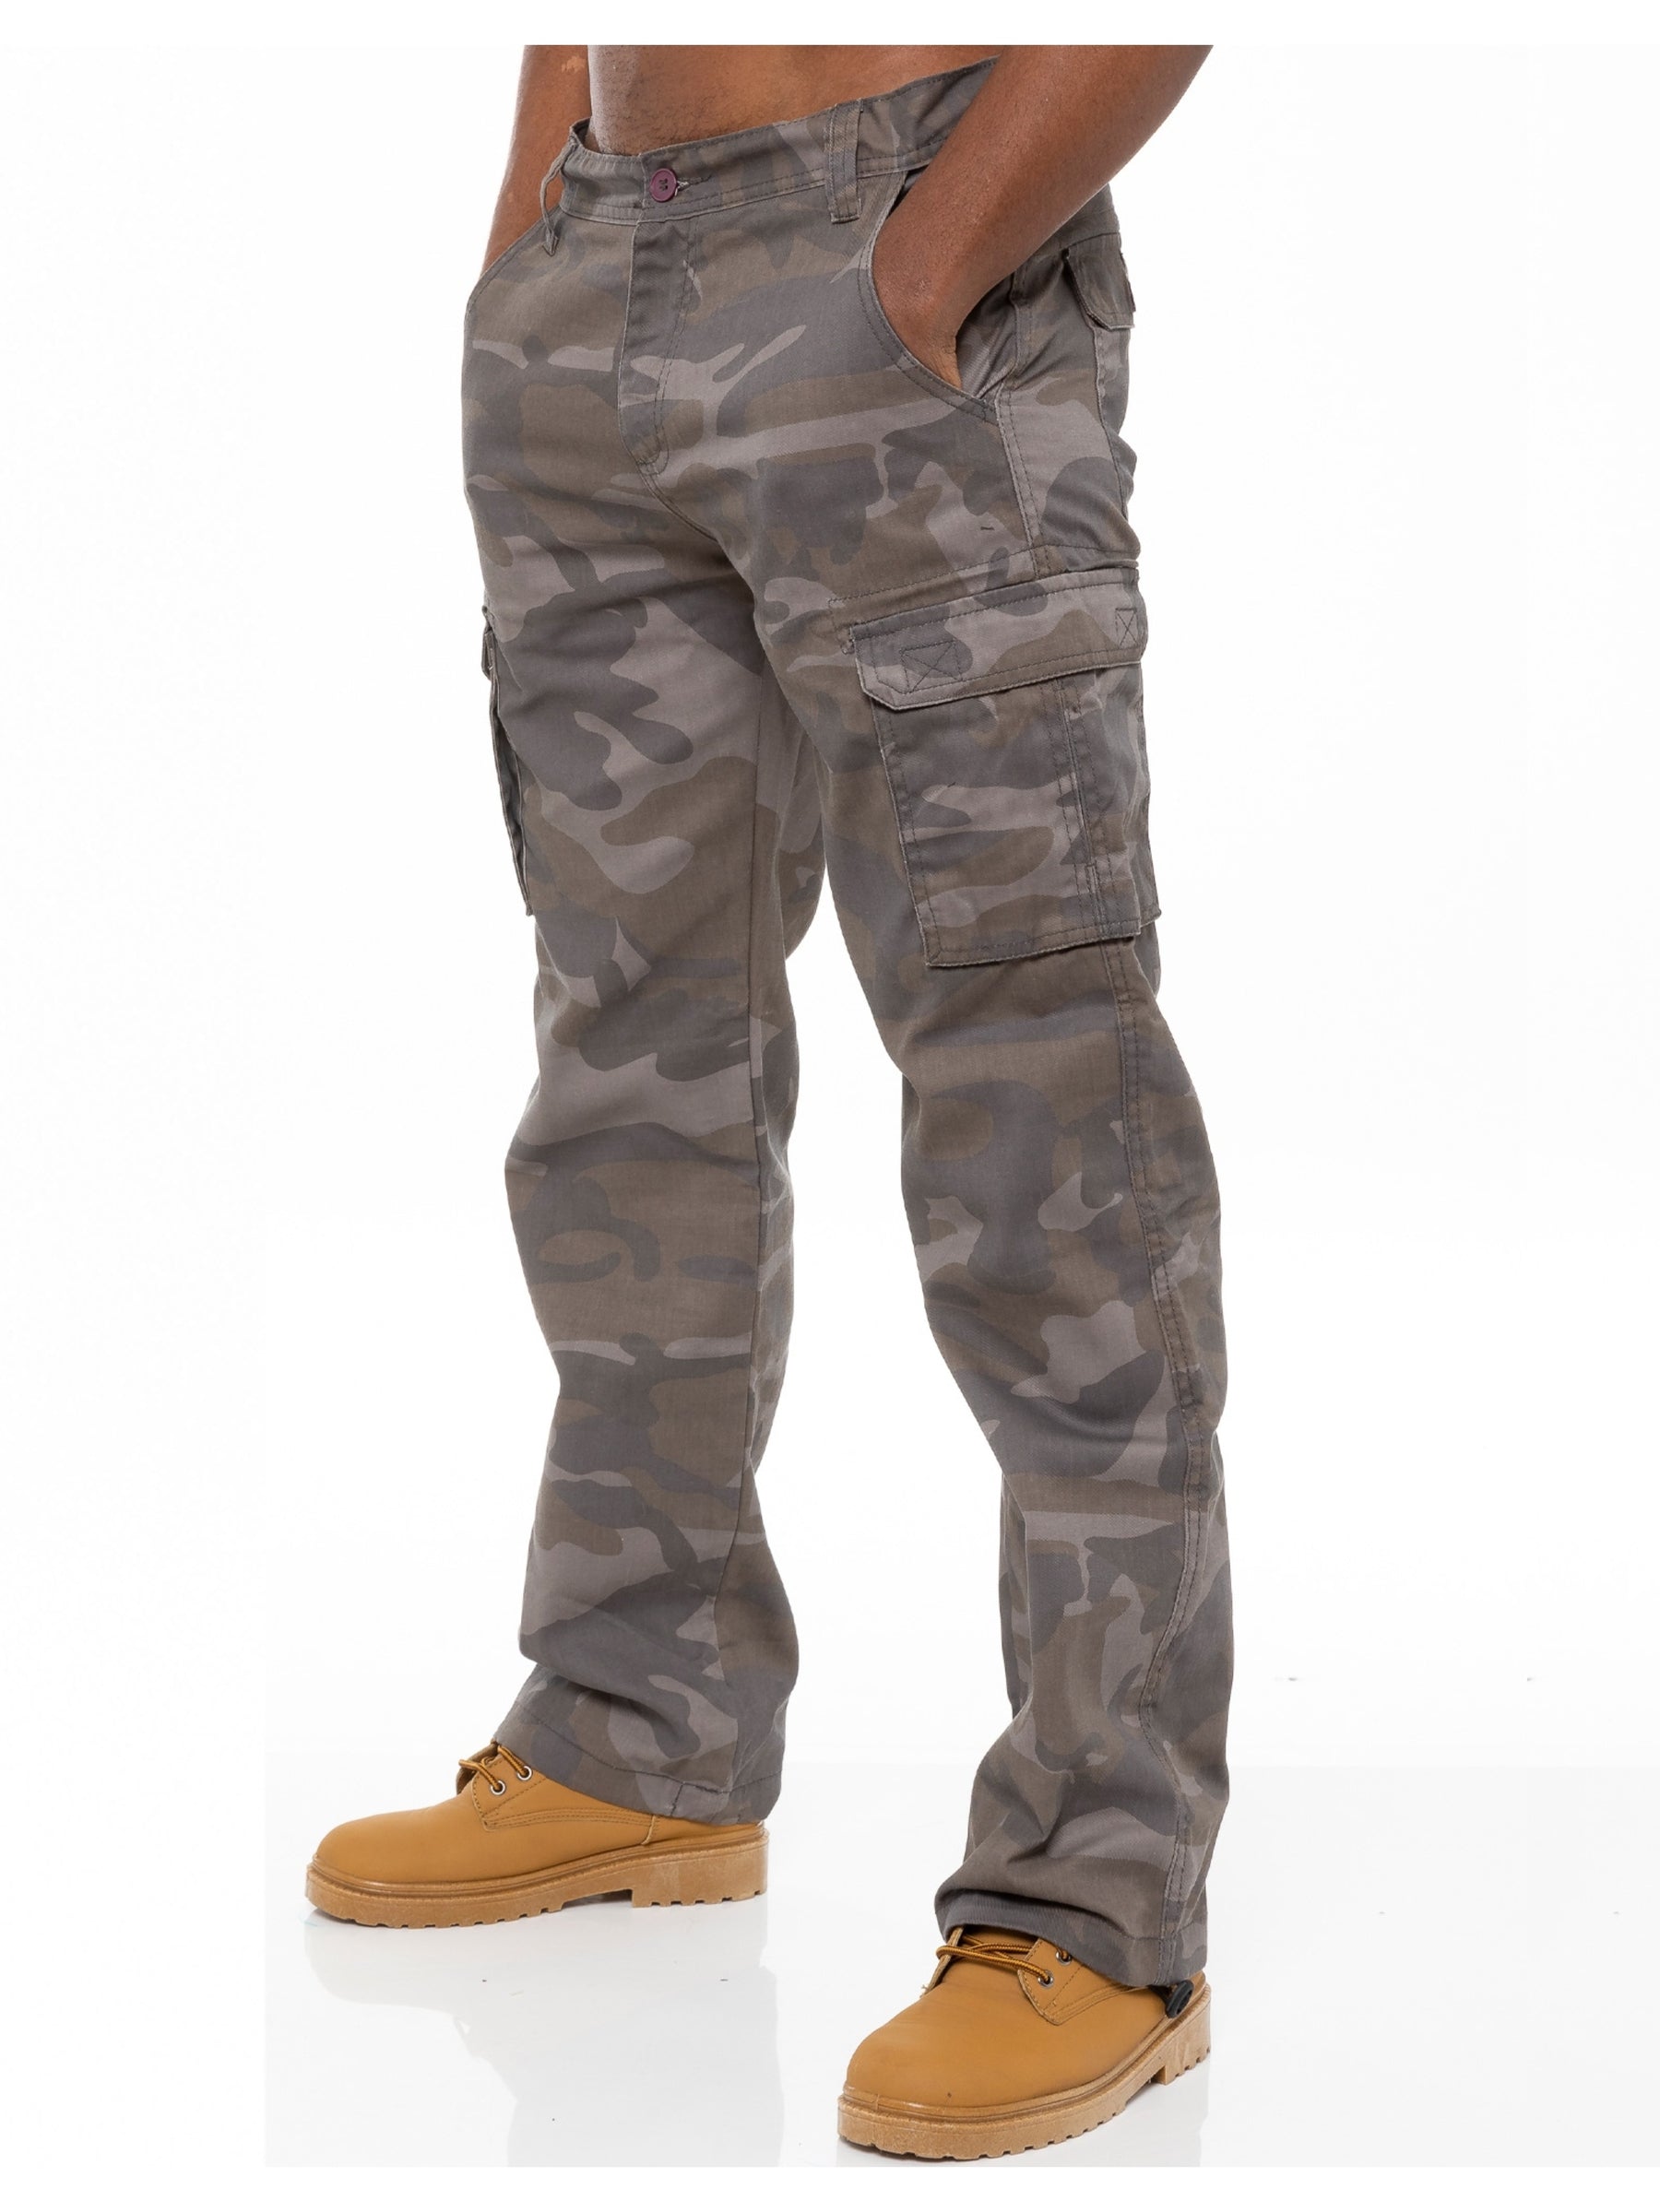 V by Very Camouflage Print Utility Trousers - Multi | very.co.uk